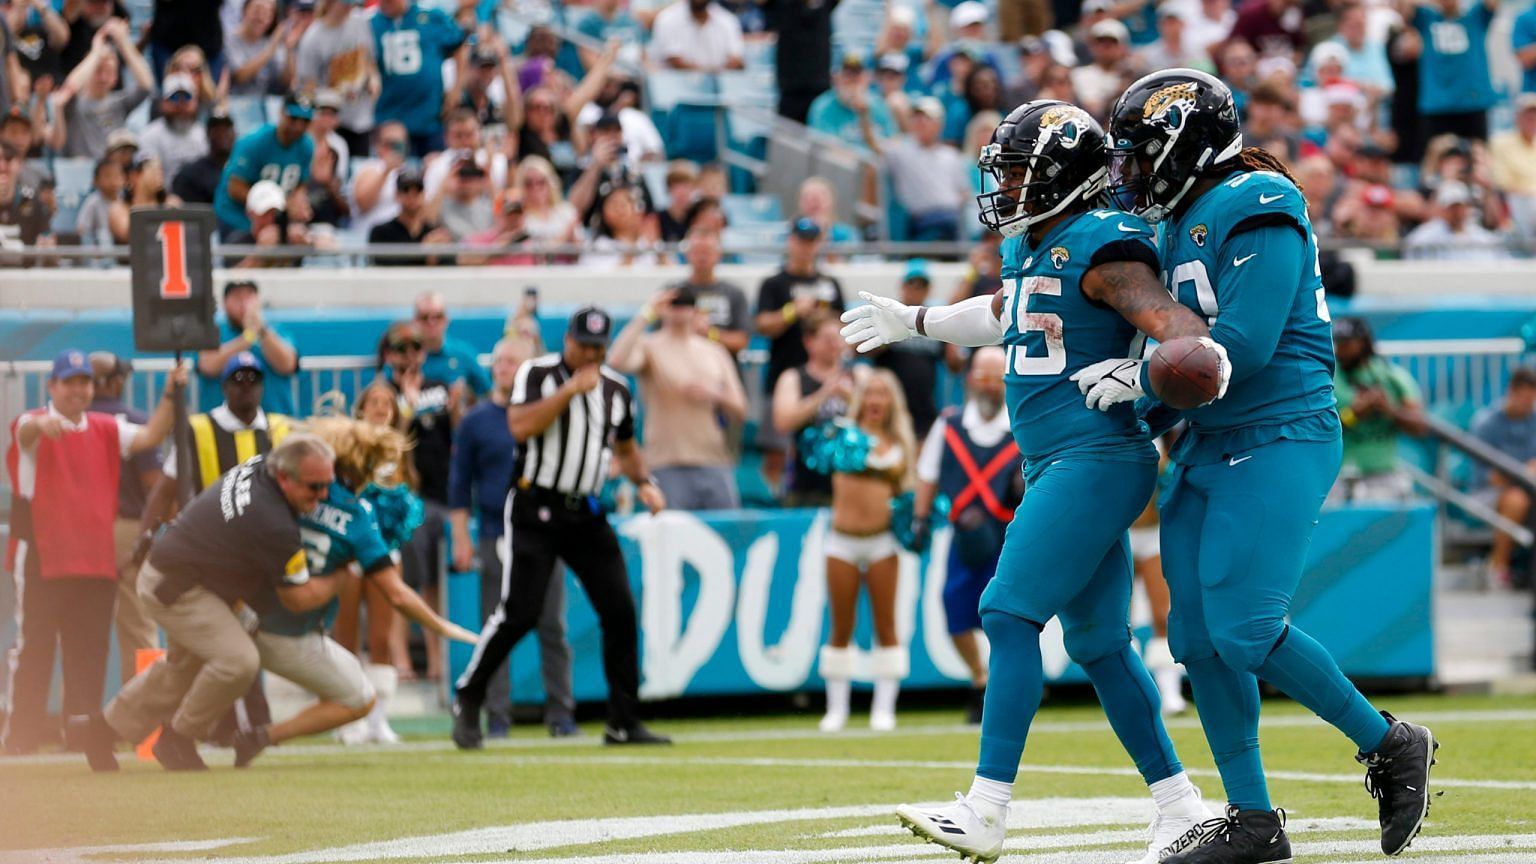 A Jaguars fan runs into the endzone for a pass on a touchdown play